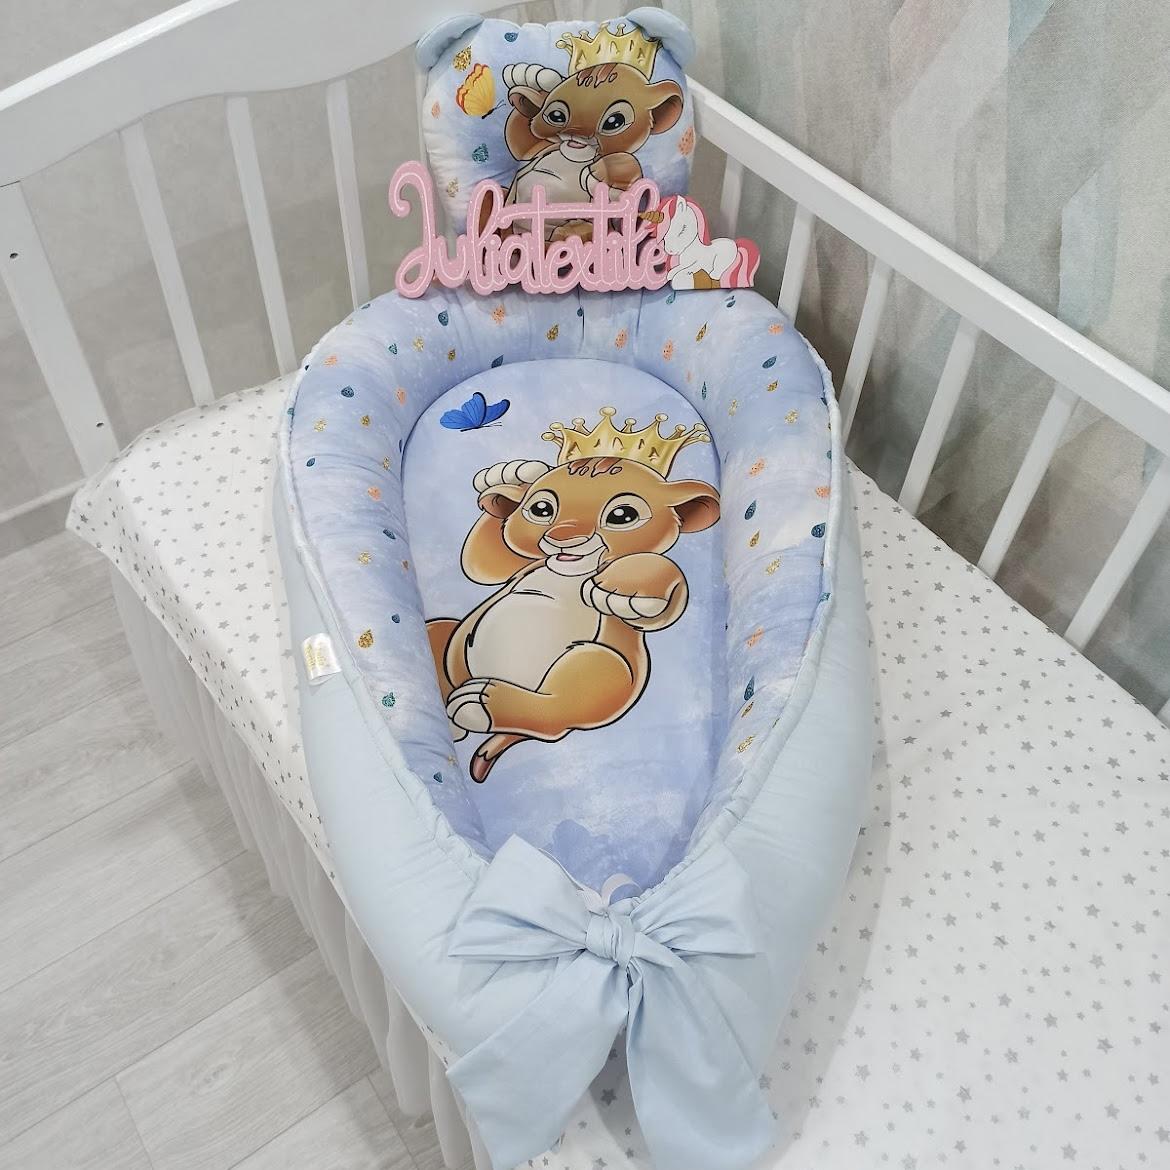 Reducer with pastel blue baby Simba print